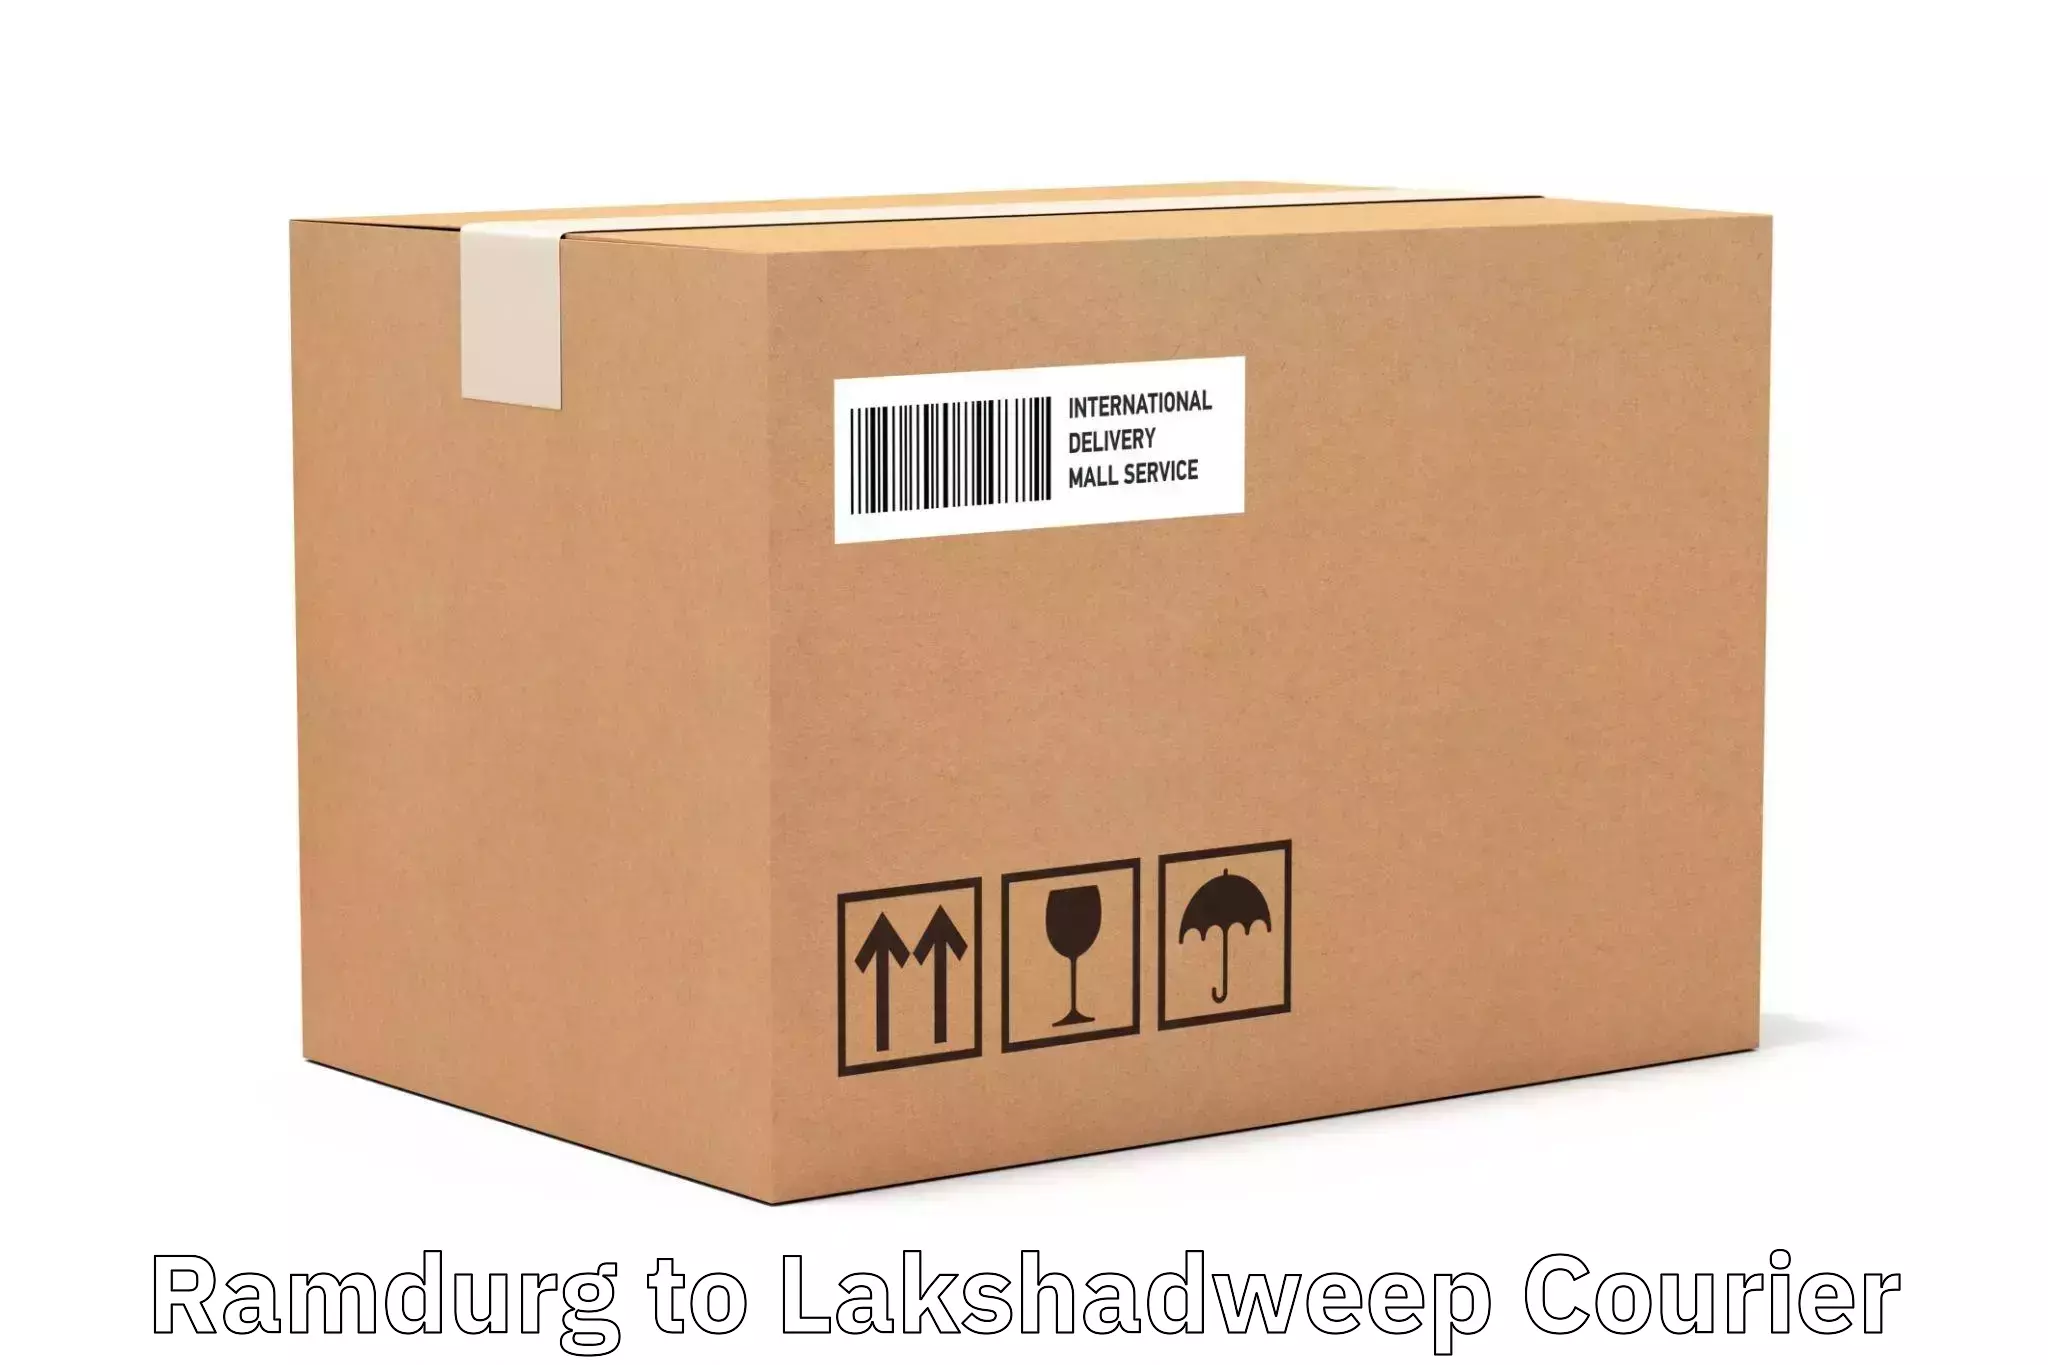 Express mail solutions Ramdurg to Lakshadweep